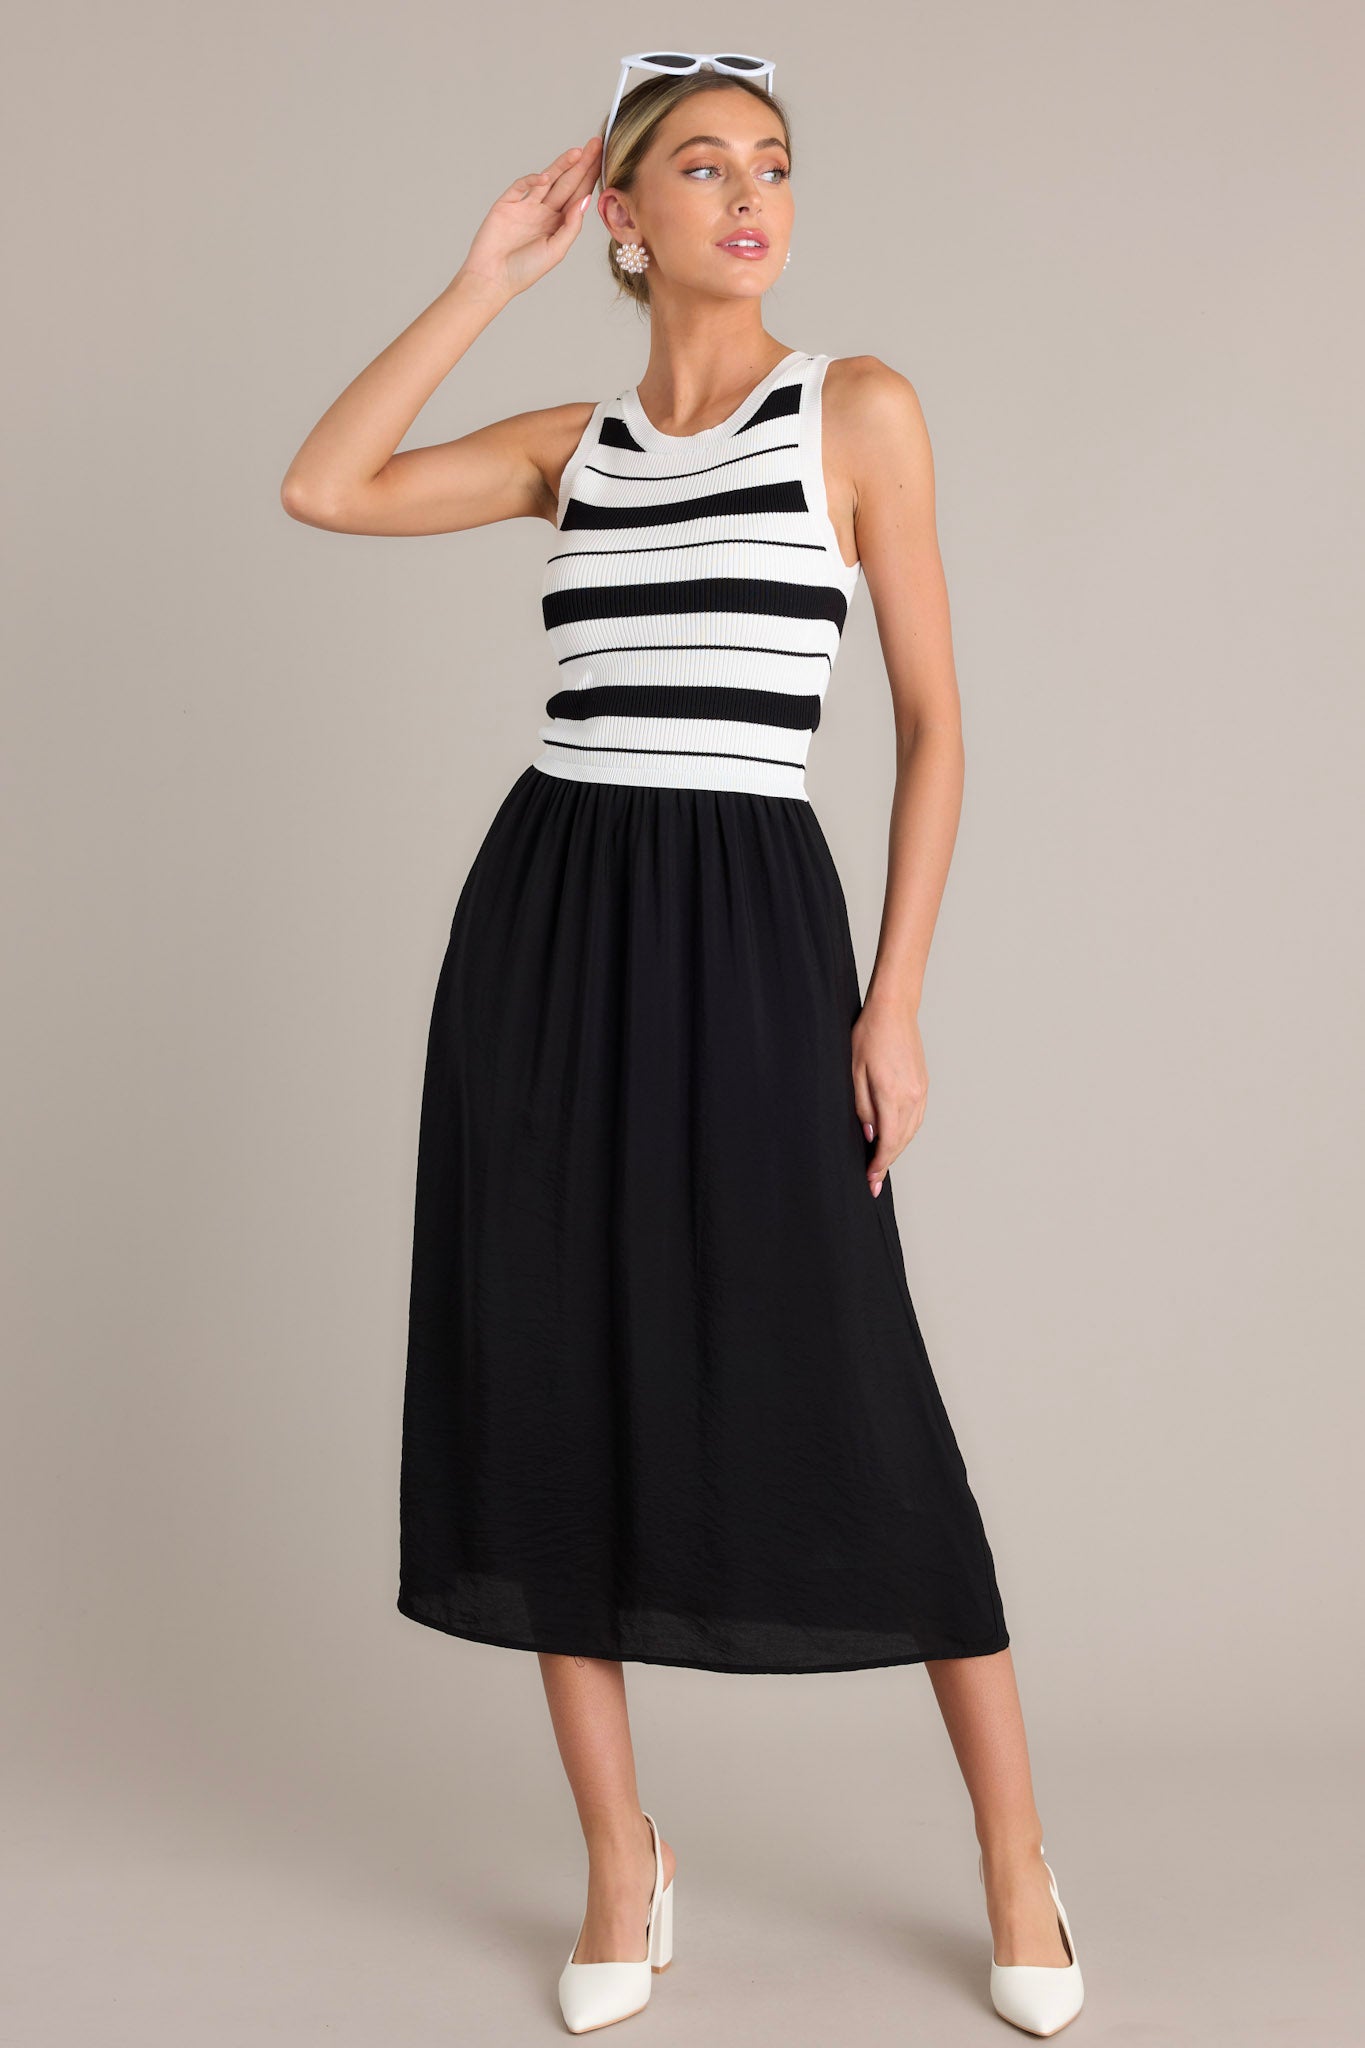 Action shot of a black striped midi dress displaying the fit and movement, highlighting the crew neckline, striped sweater-like bodice, solid colored skirt, functional hip pockets, and sleeveless design.